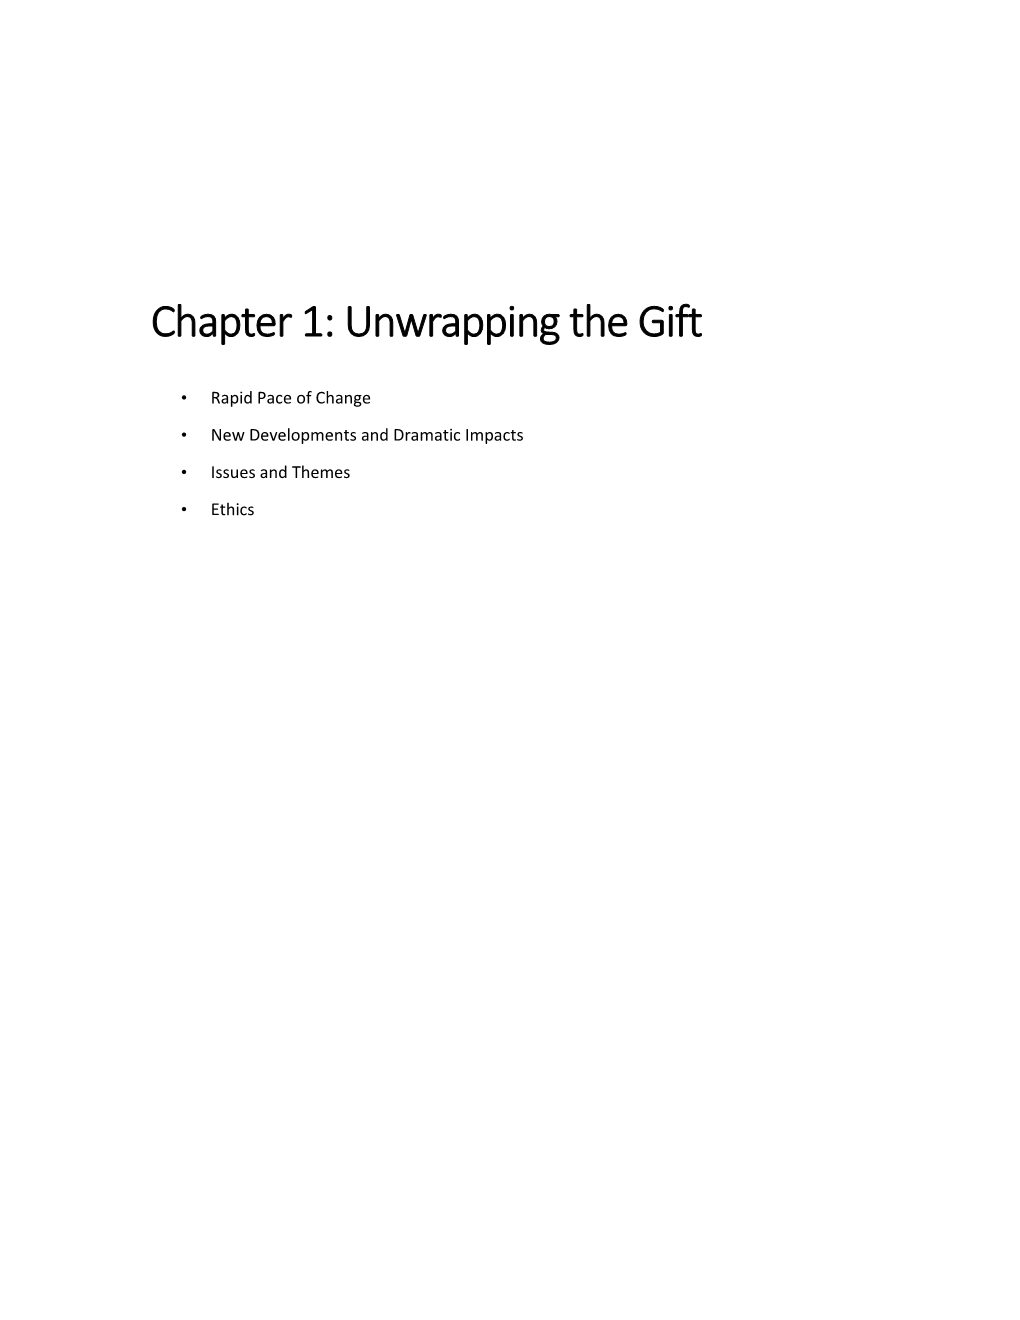 Chapter 1: Unwrapping the Gift